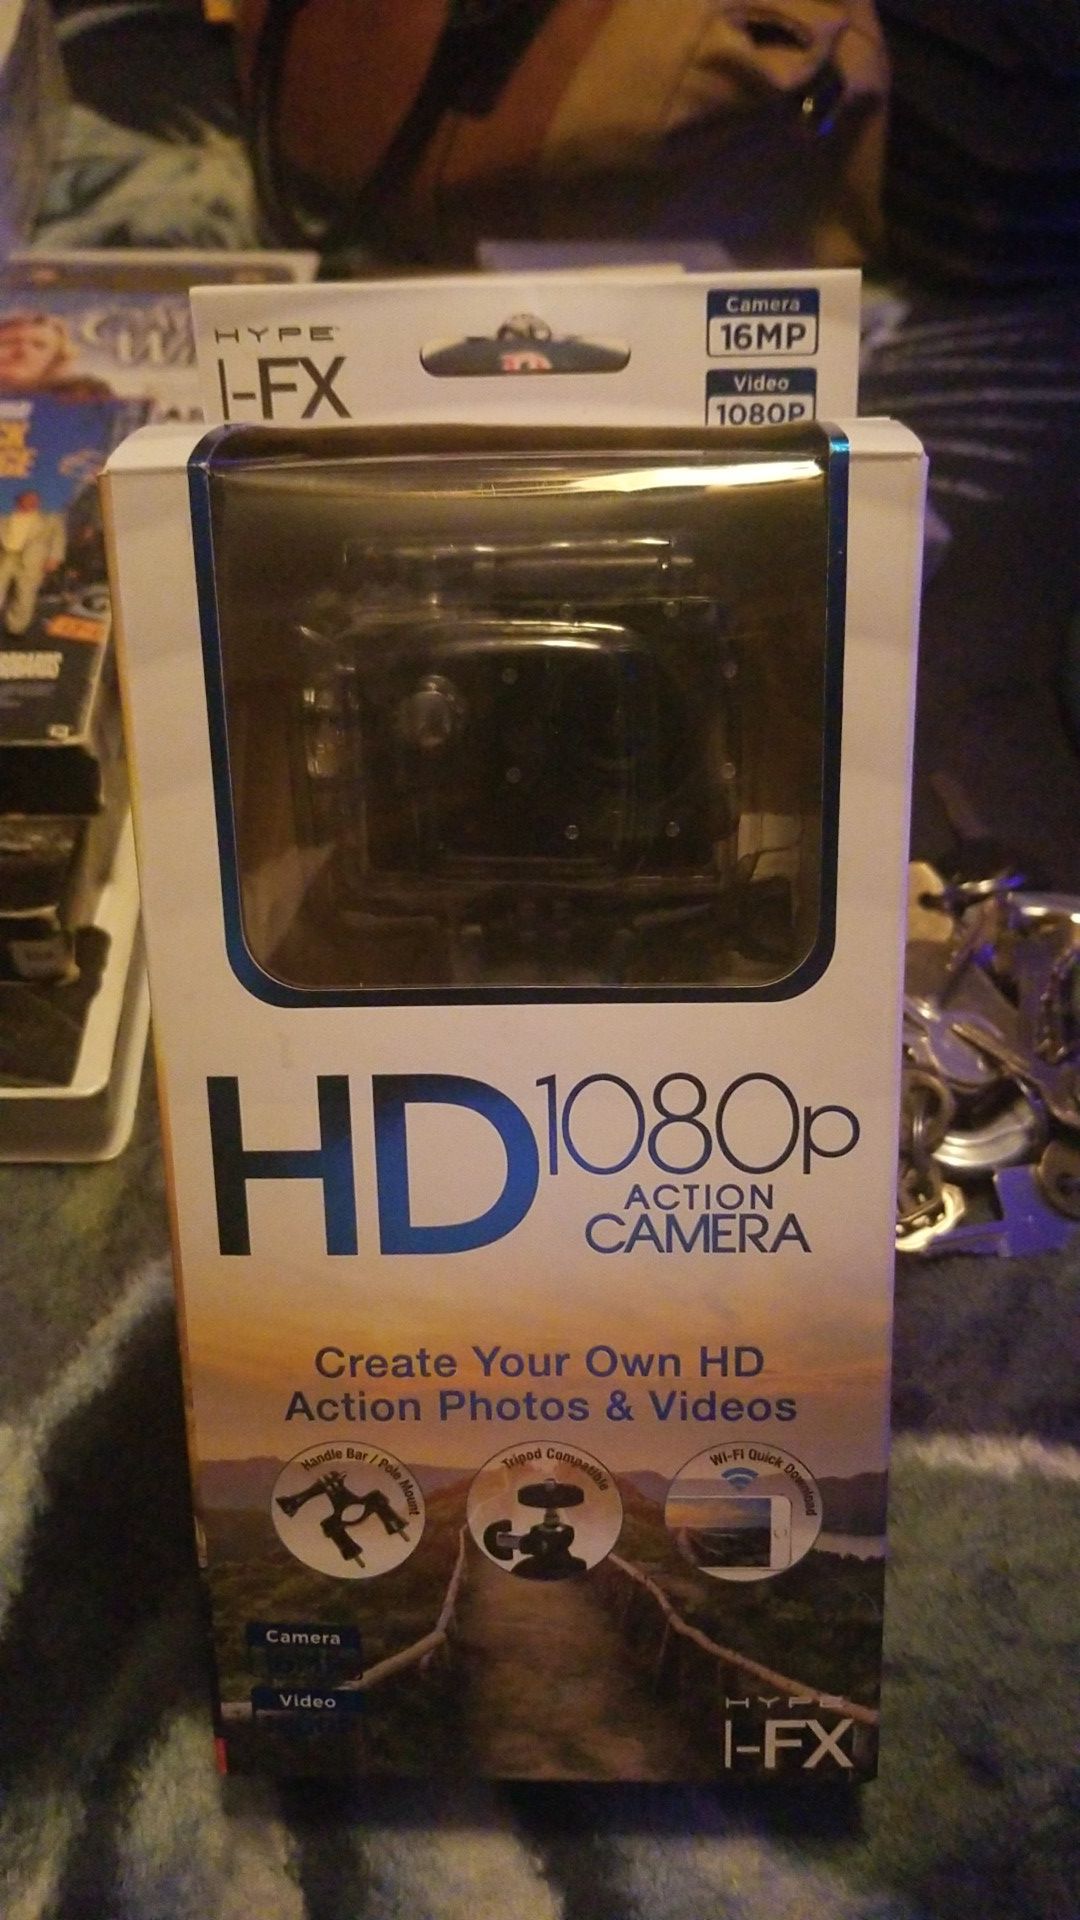 HD 1080p action camera brand new